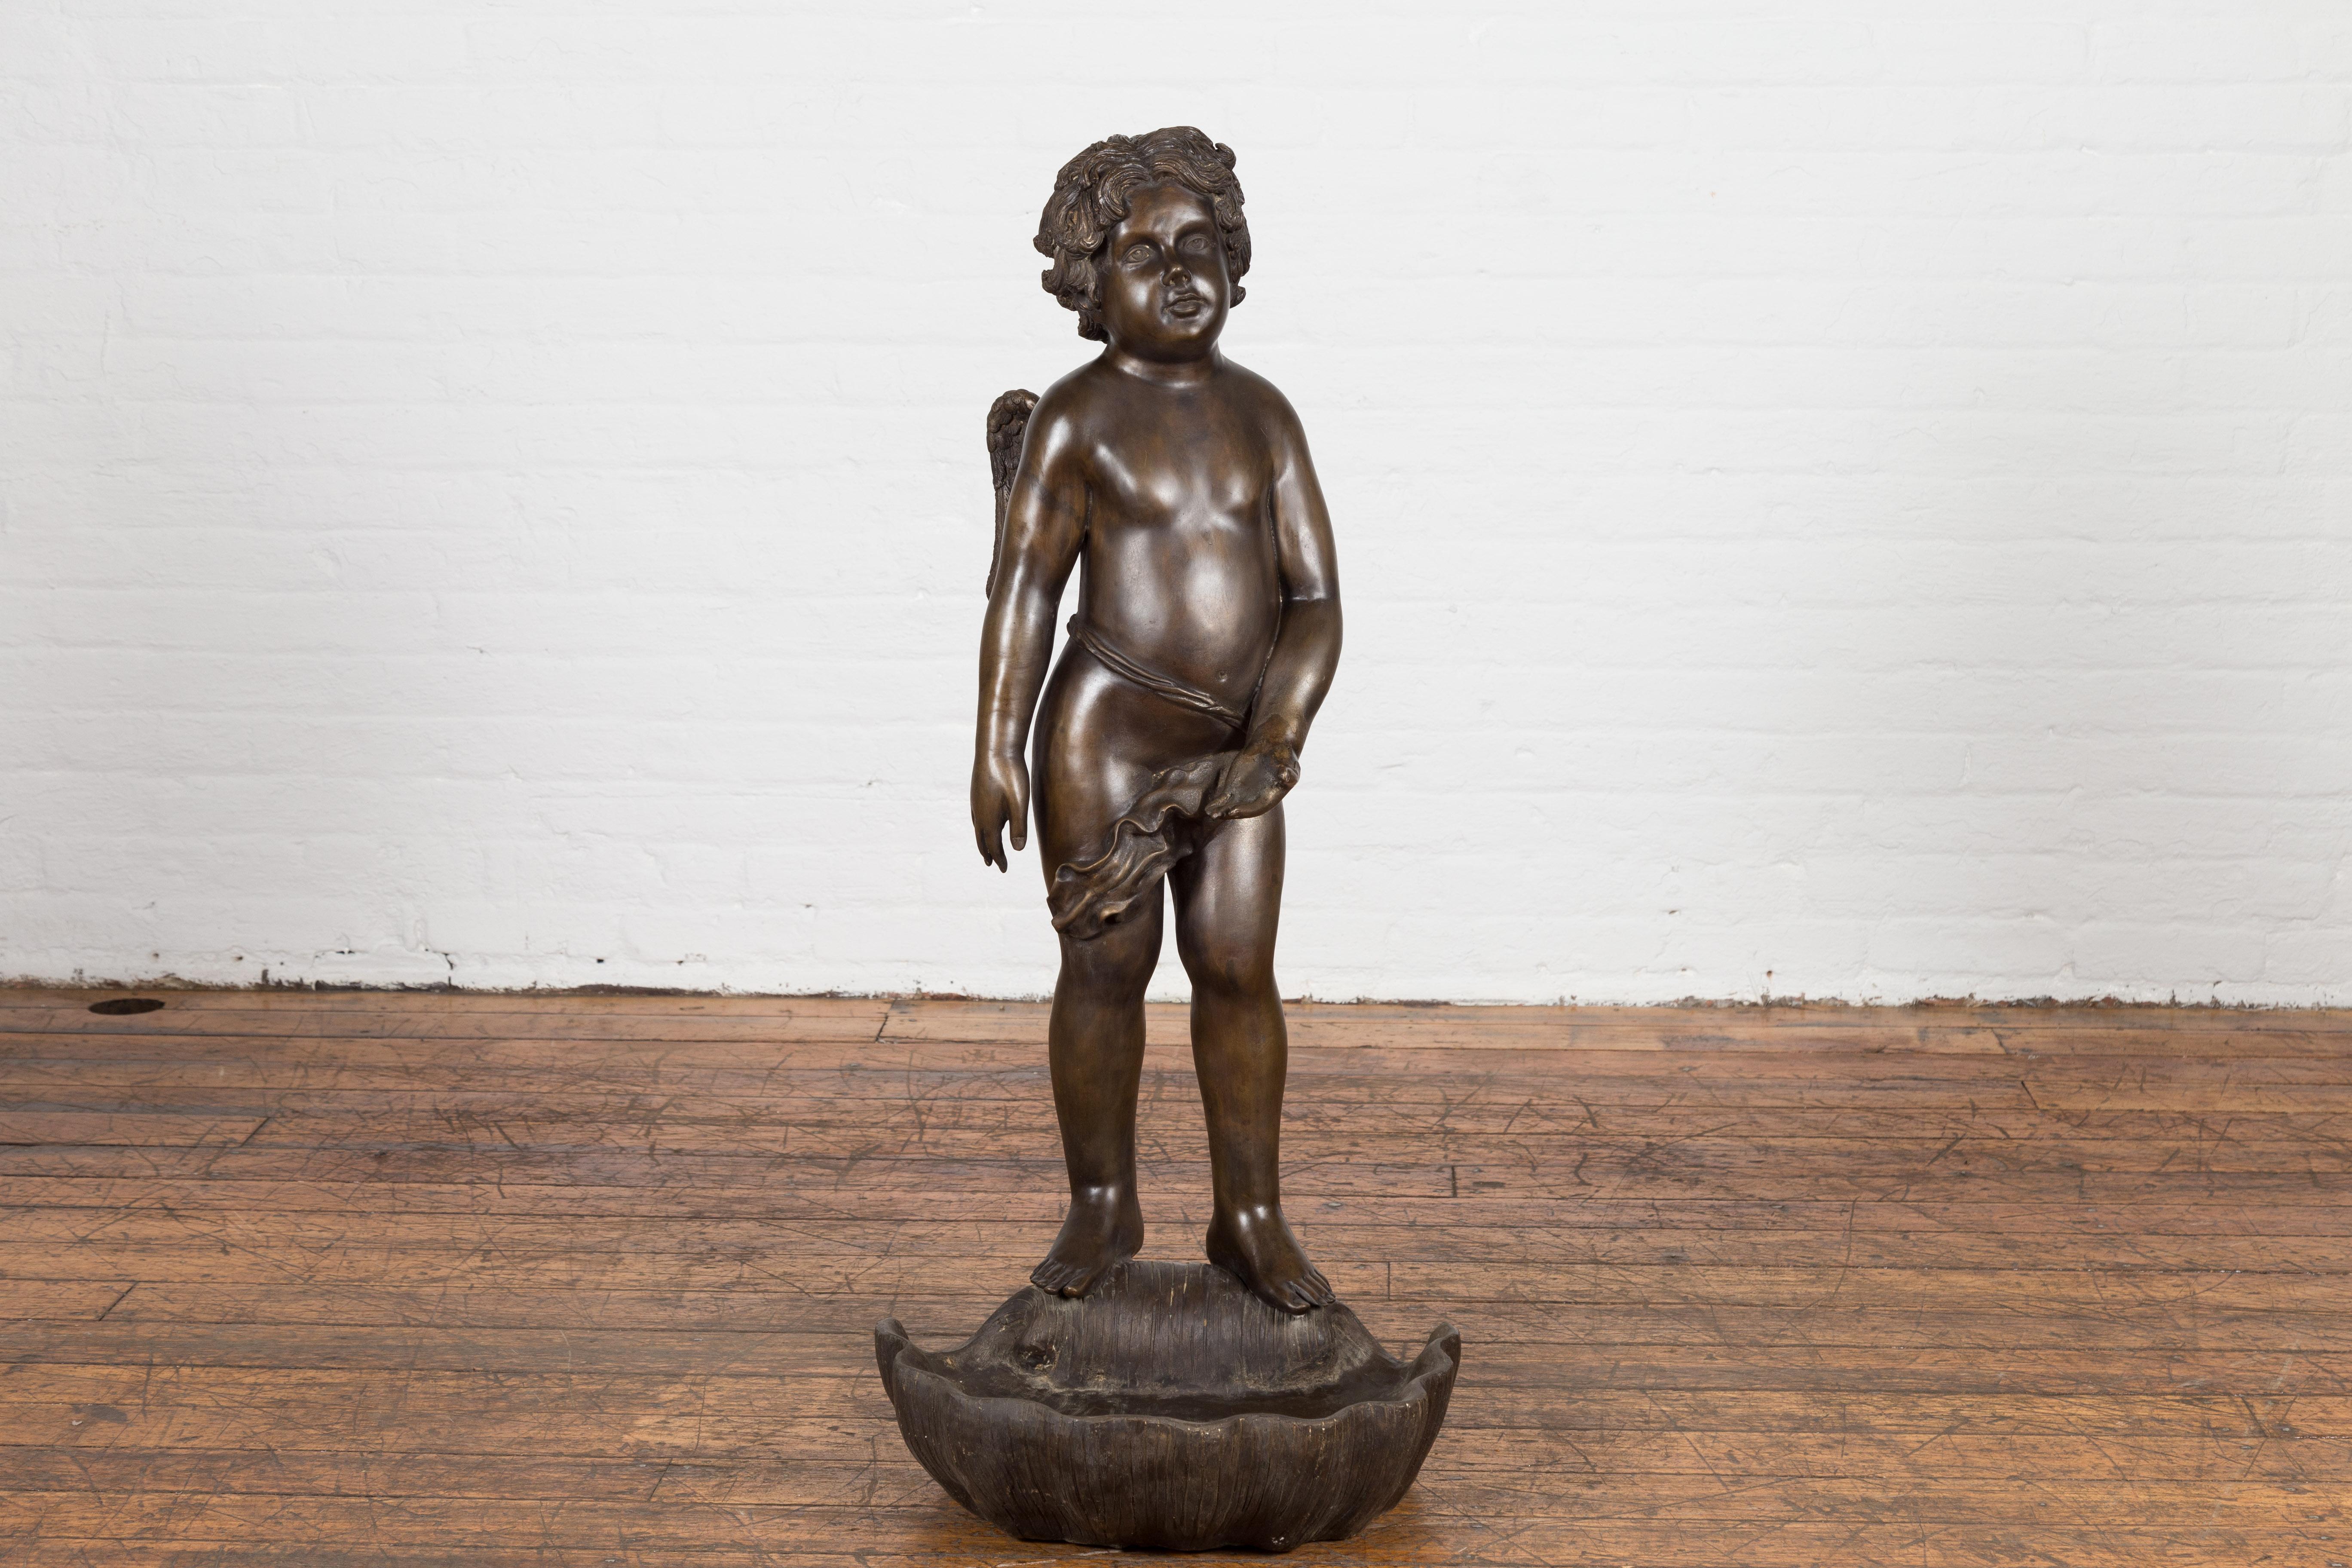 A vintage Greco-Roman style lost wax cast bronze statue of a cherub standing on a shell from the 20th century, with great details in the curly hair, chubby face and wings, in dark patina. This vintage Greco-Roman style statue beautifully captures